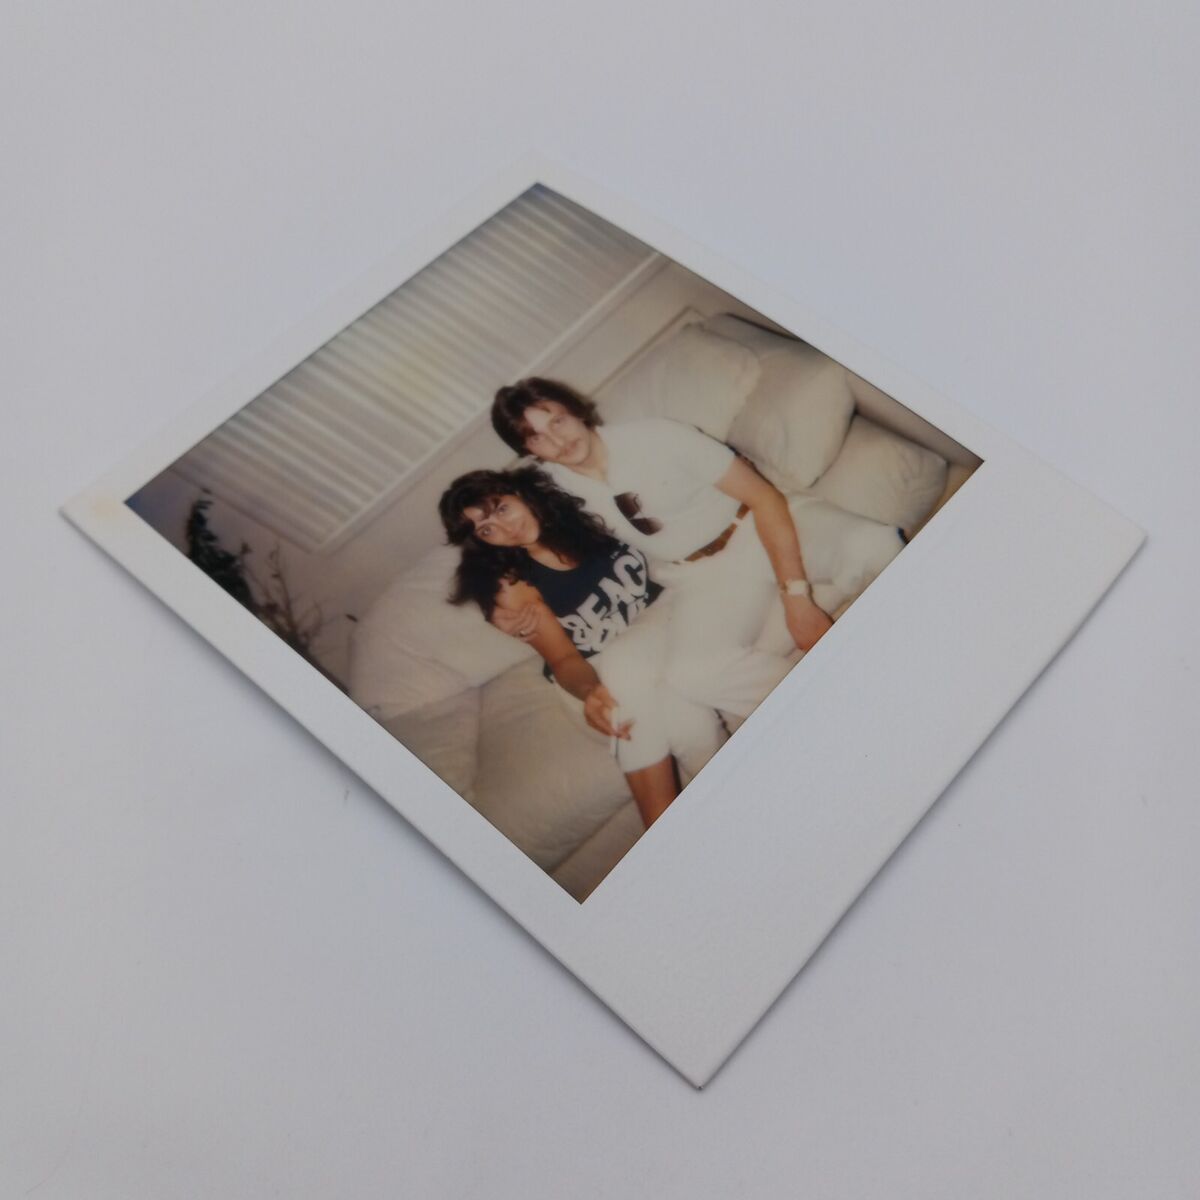 Best of Cute couple polaroid pictures